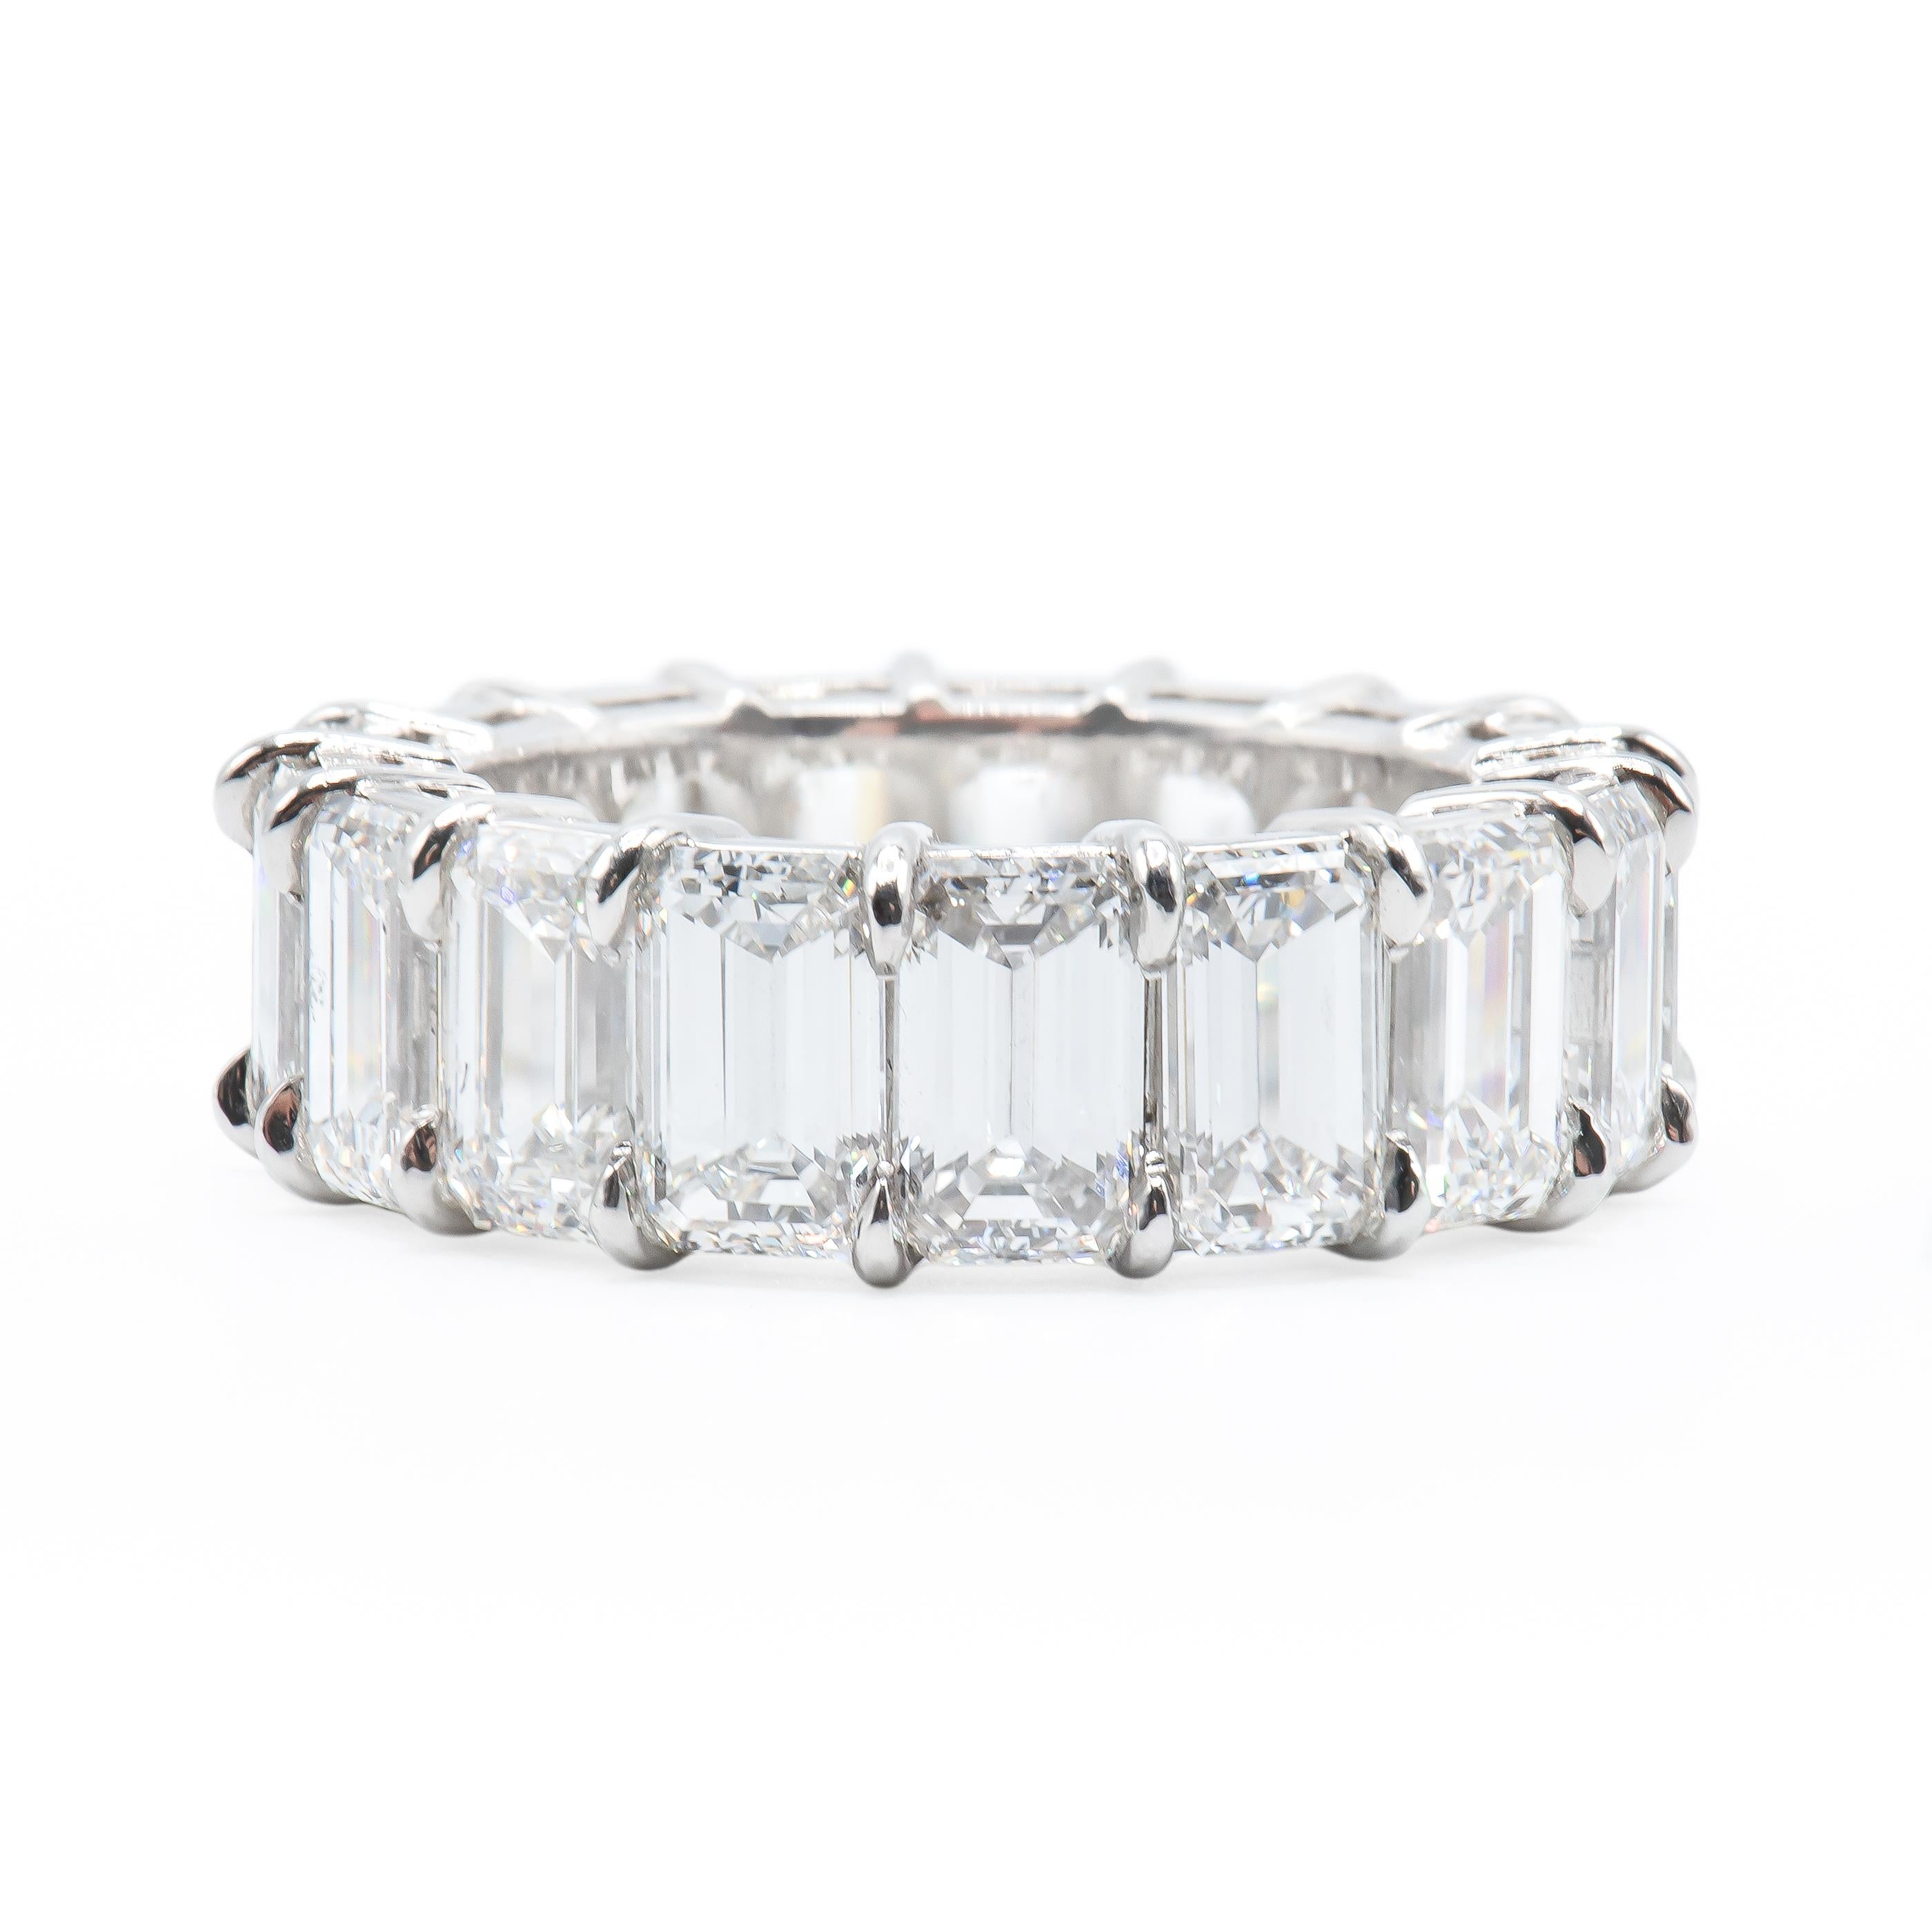 Classic Emerald Cut Diamond Eternity Band featuring 17 Stones weighing a Total of 10.02 Carats. Average is 58 Points each.
Diamonds are of G-H color and VS Clarity.
Set in Platinum.
Size 6.5